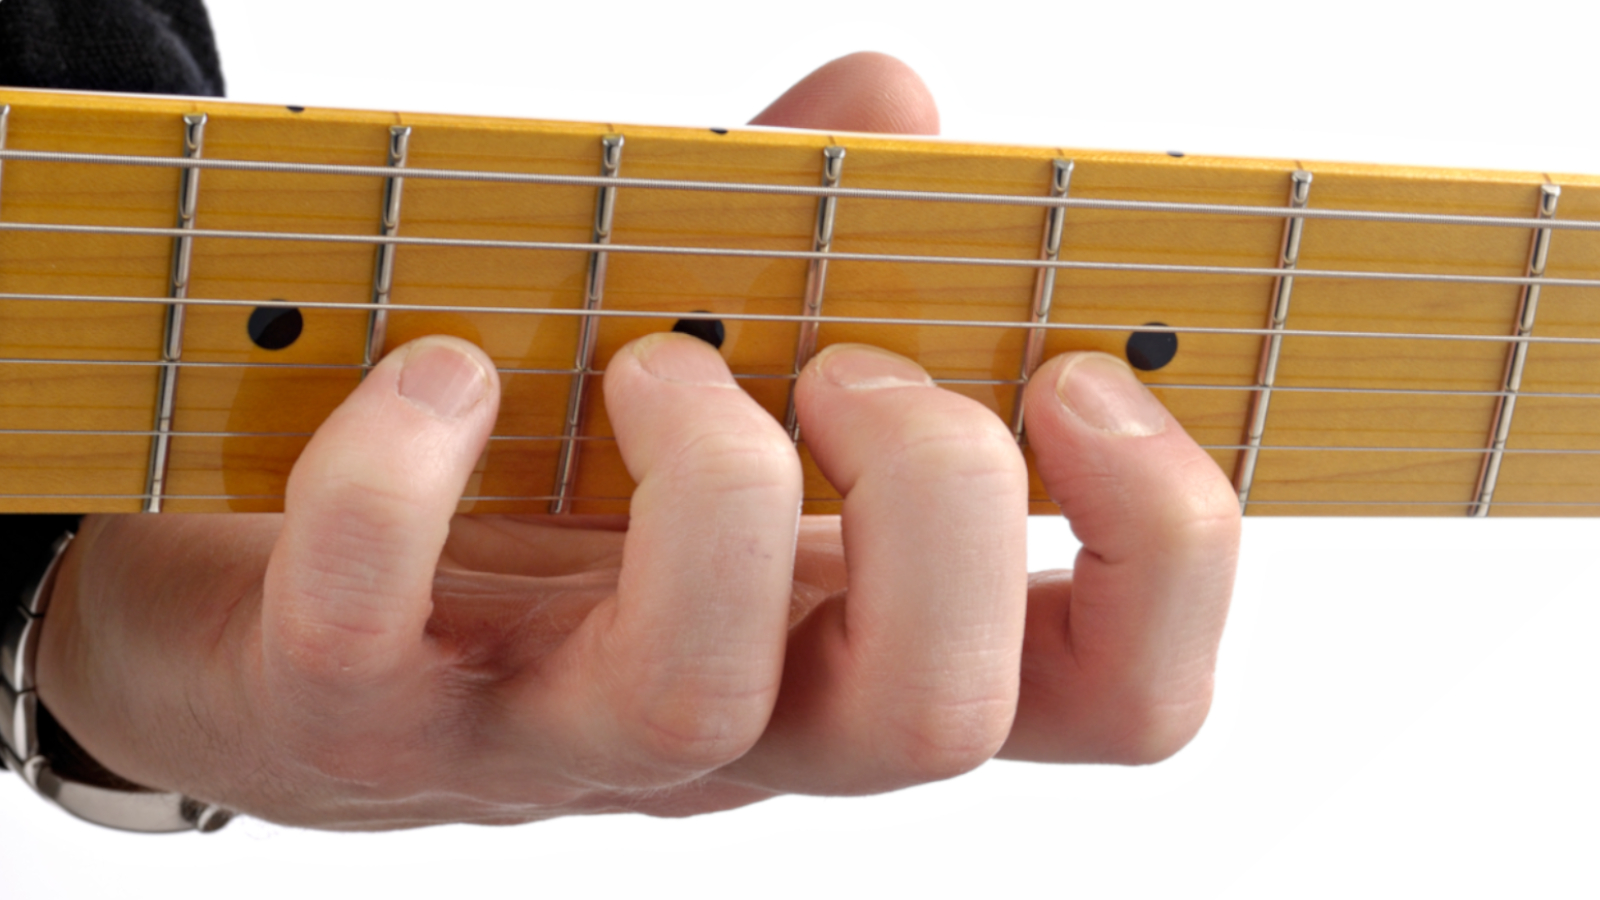 Learn All the Notes on the Fretboard in This Easy-to-Follow Lesson